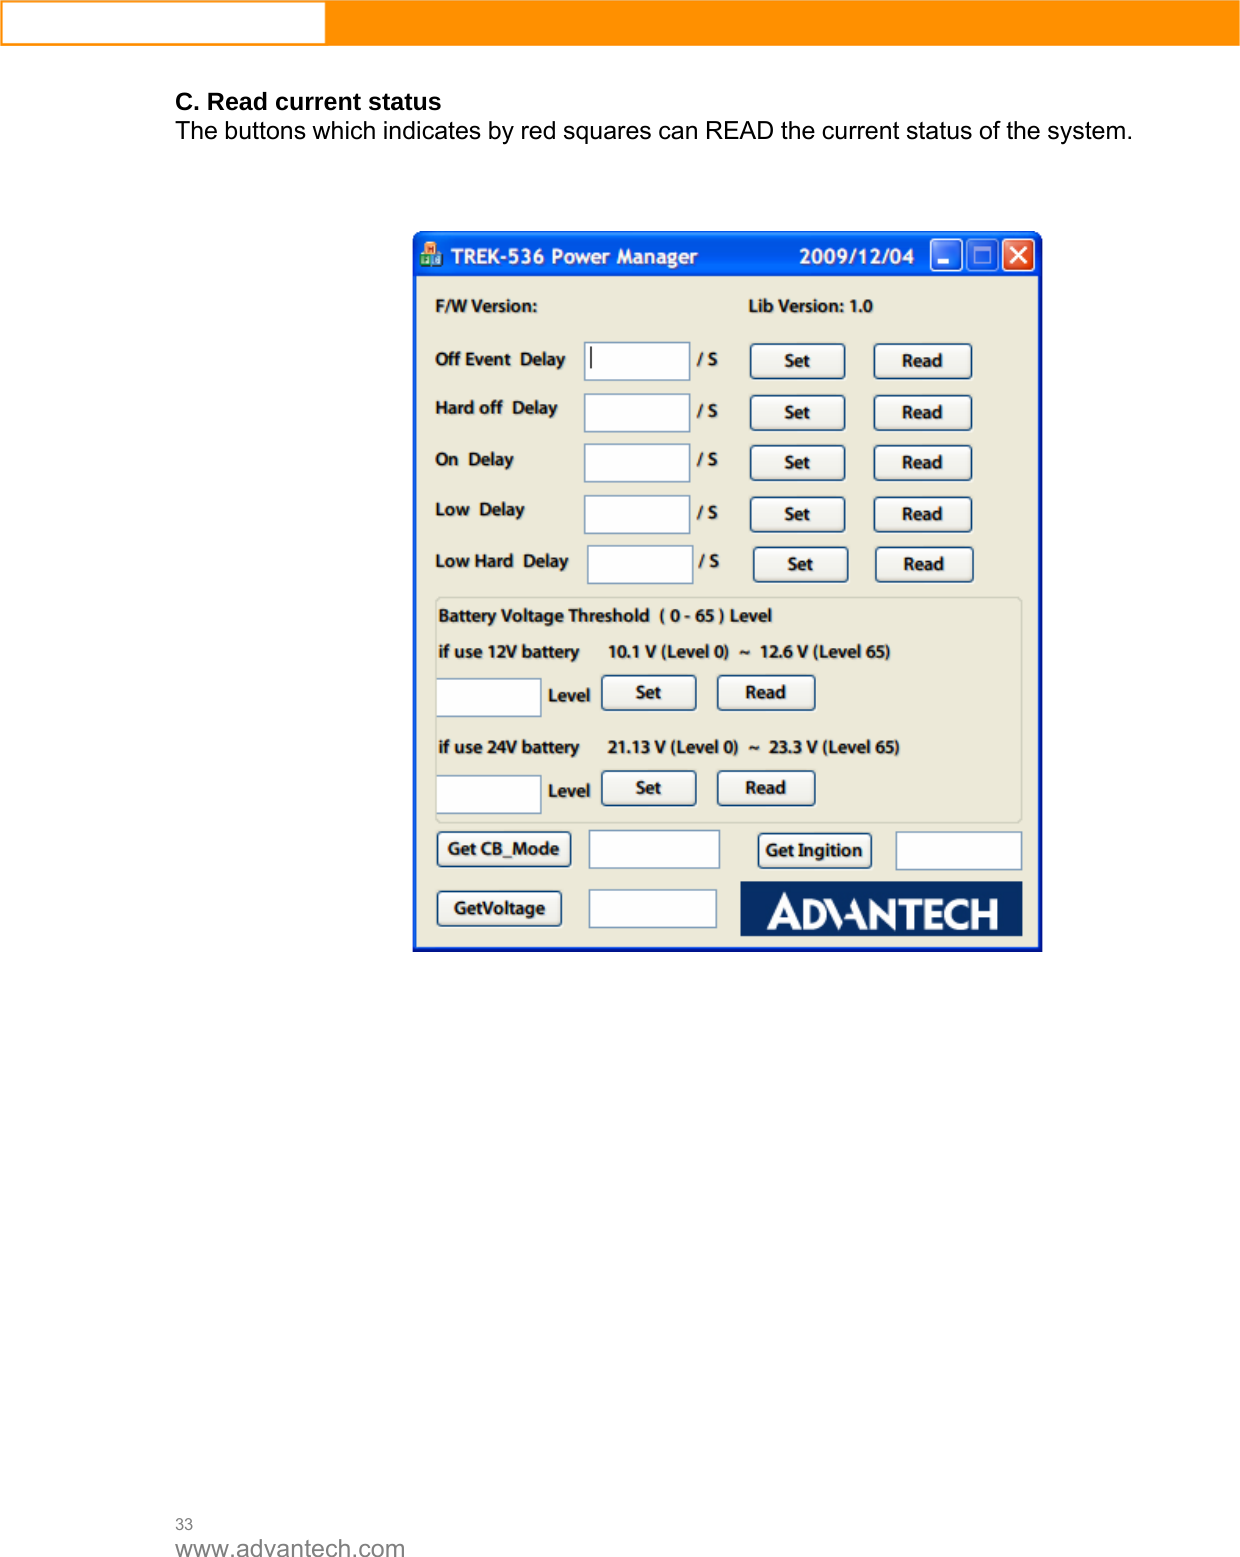  33 www.advantech.com  C. Read current status The buttons which indicates by red squares can READ the current status of the system.      